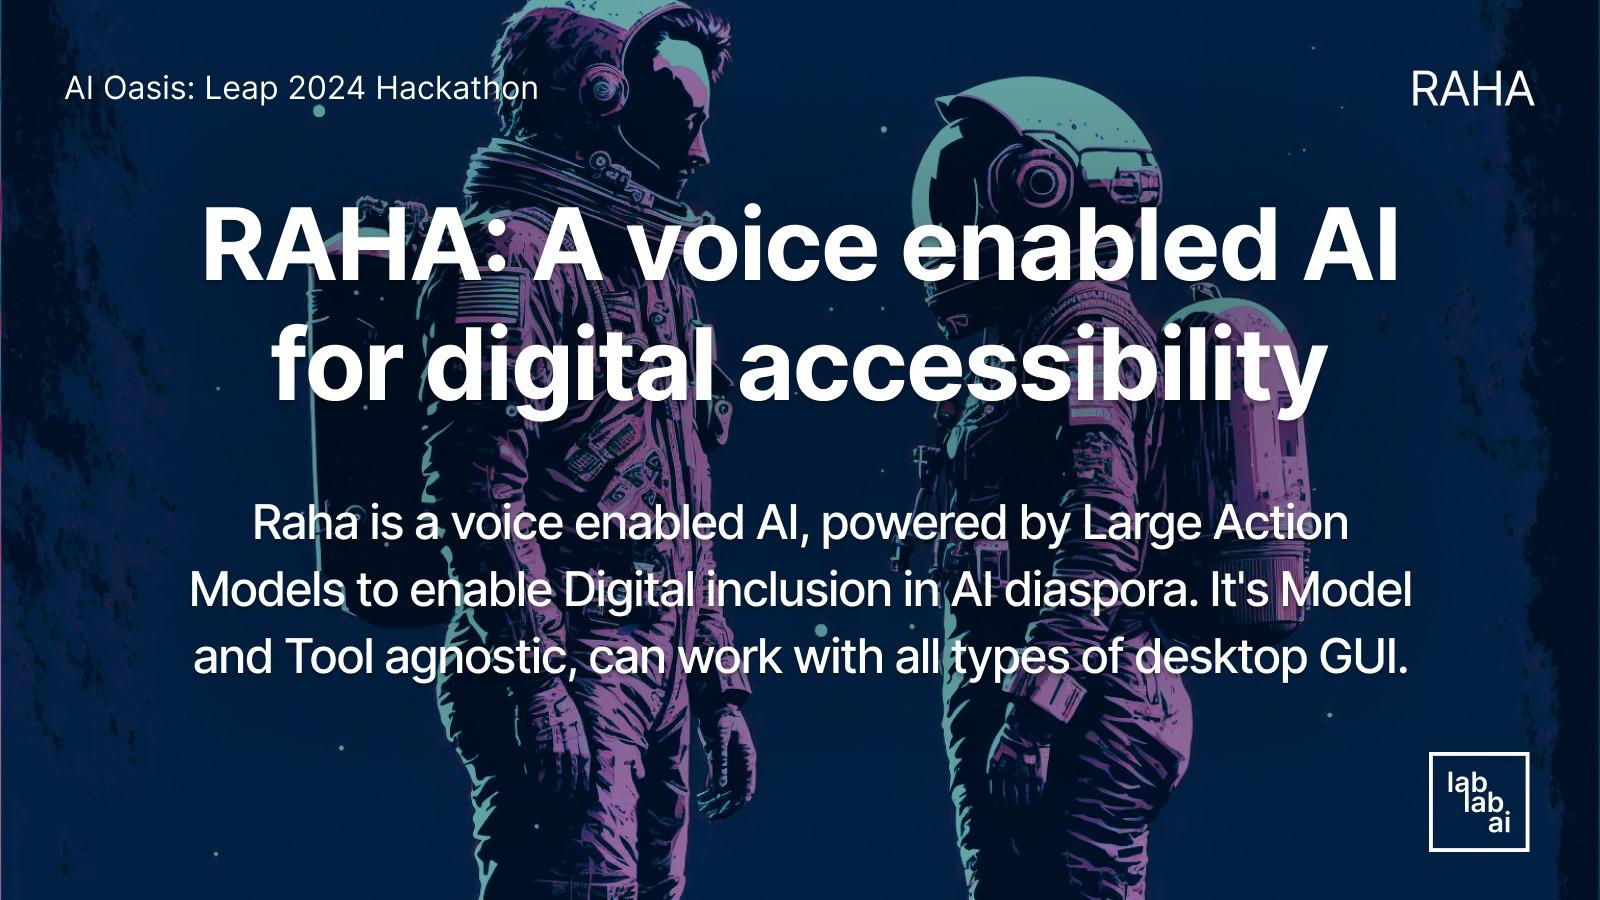 A voice enabled AI for digital accessibility